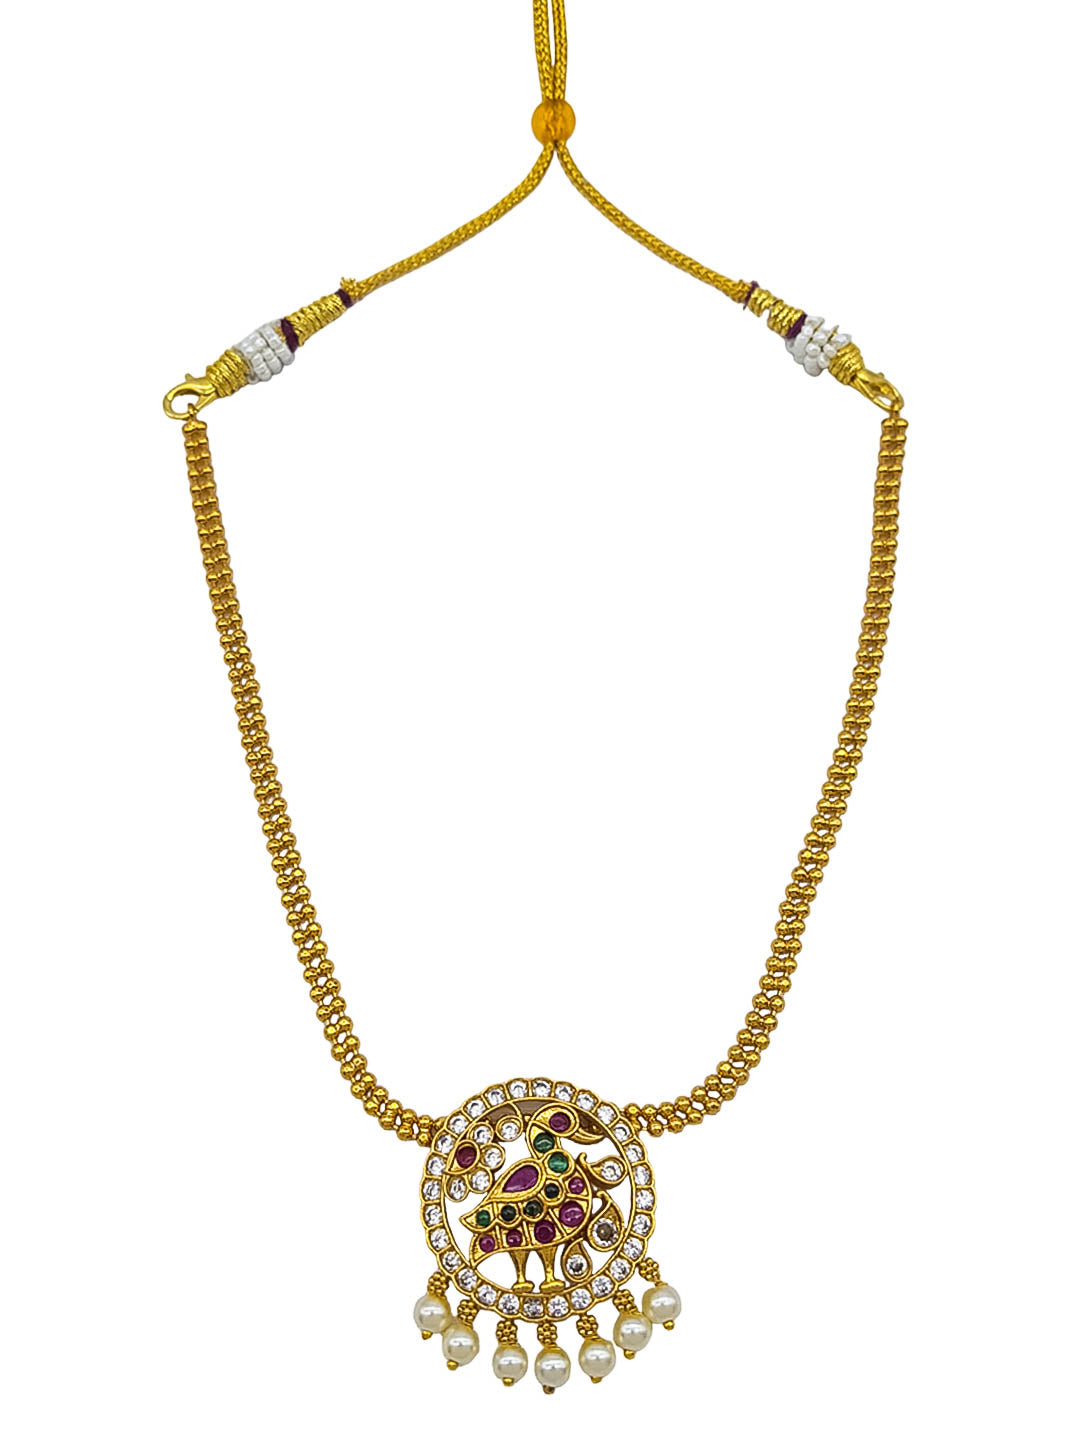 Trendy Necklace Set with Stones 22194N